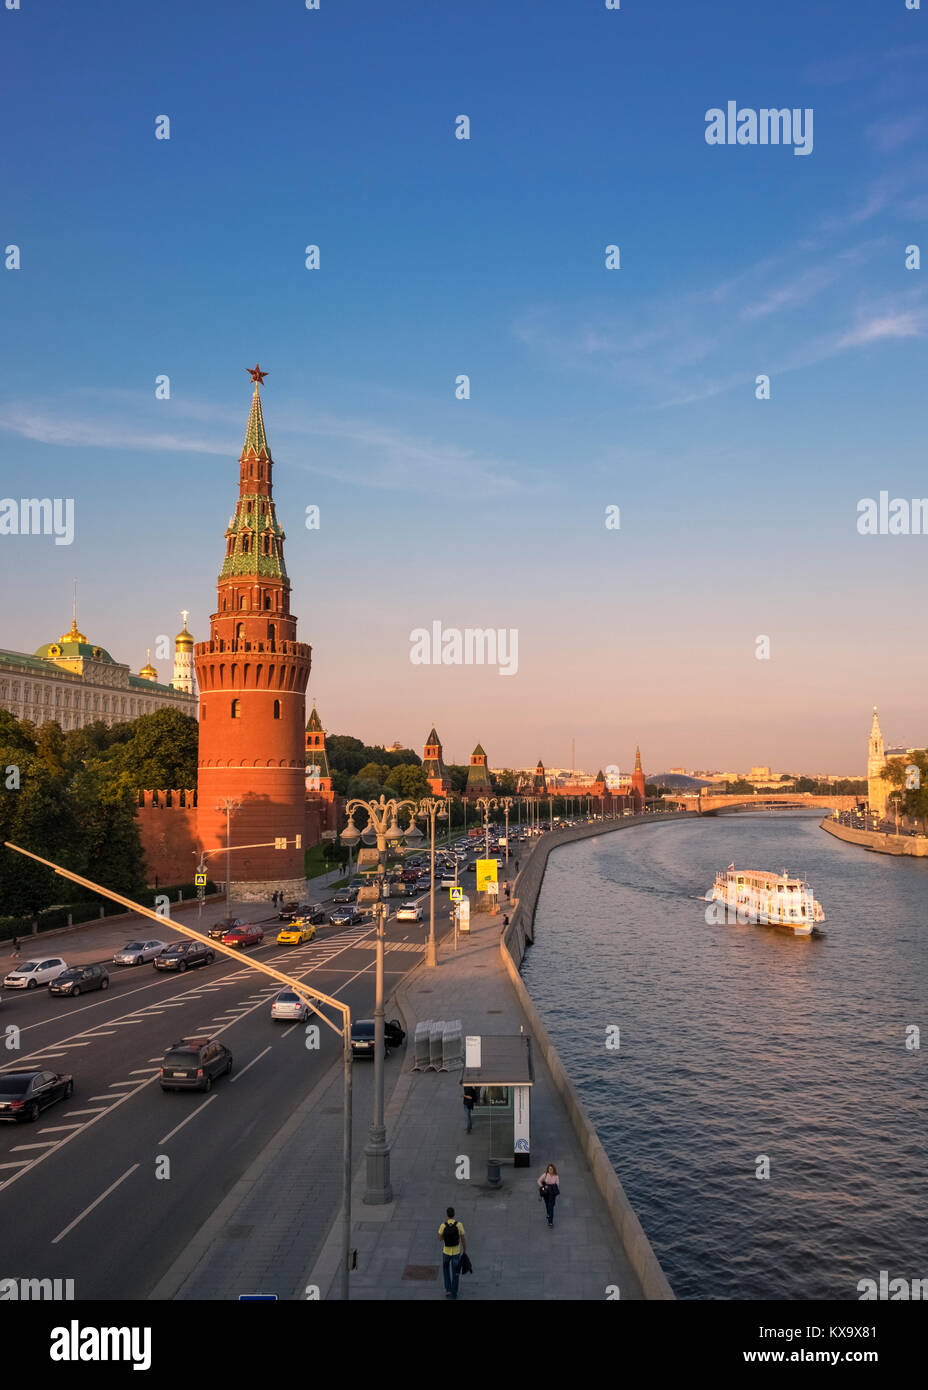 Cityscape view of Vodovzvodnaya Tower on the south western side of the Kremlin, overlooking the Moscow River, Moscow, Russia. Stock Photo